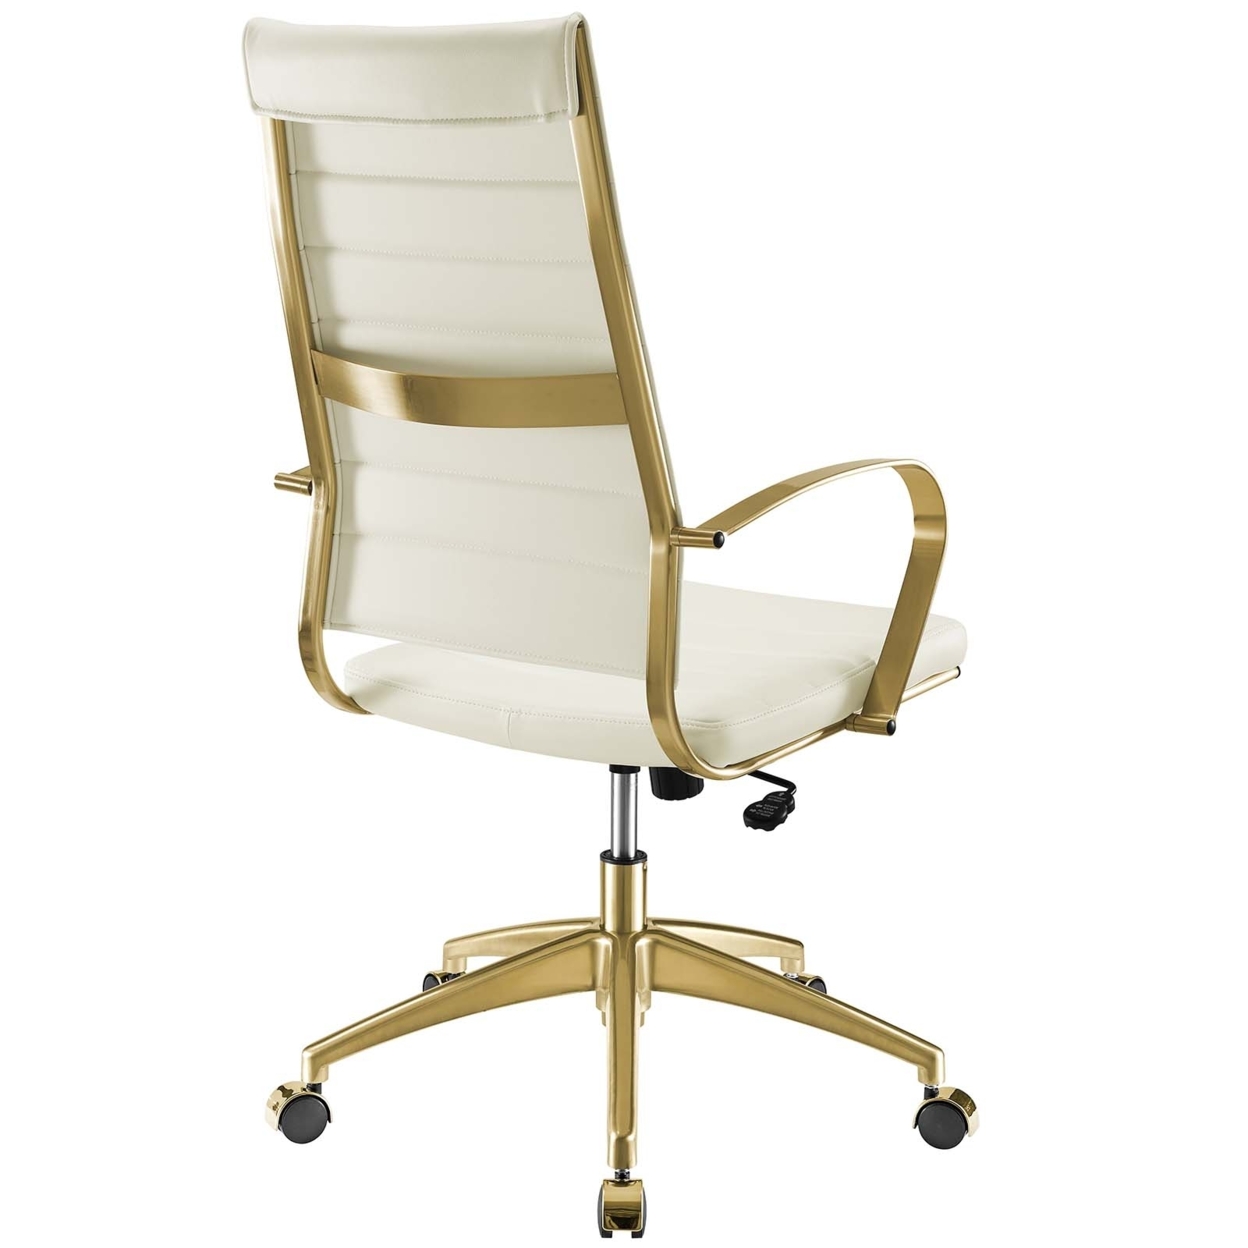 Jive Gold Stainless Steel Highback Office Chair,Gold White